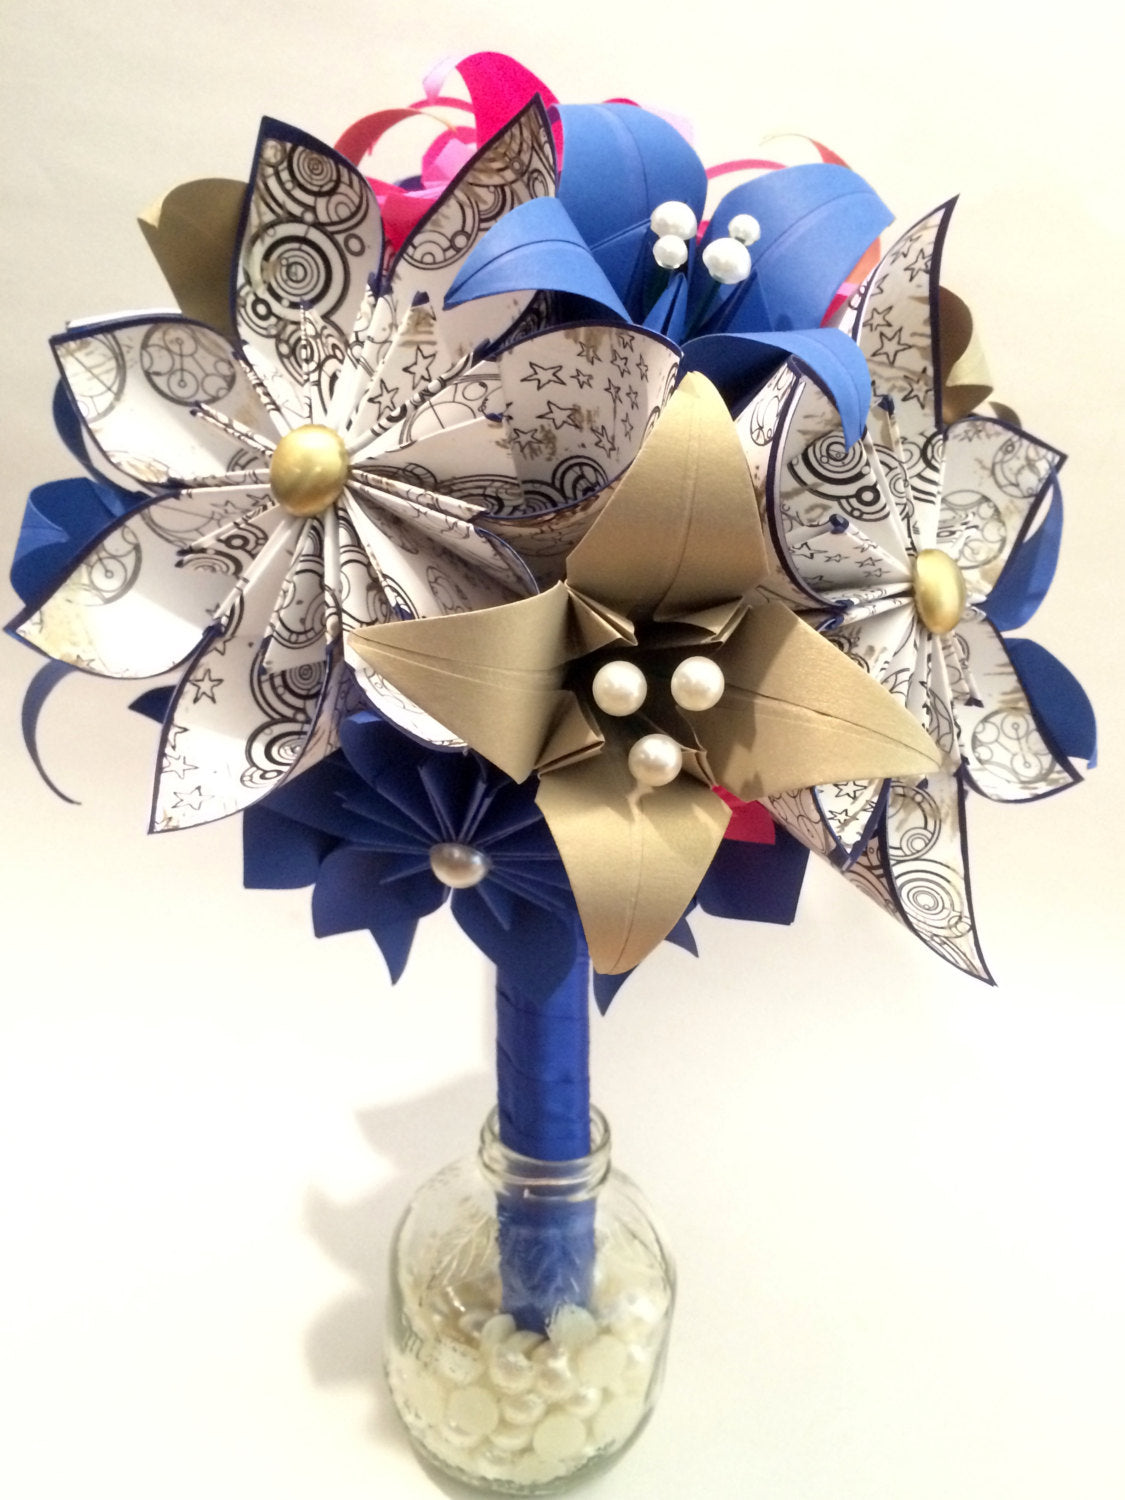 Bridal Bouquet of Paper Flowers- handmade origami, hydrangea, one of a –  Dana's Paper Flowers